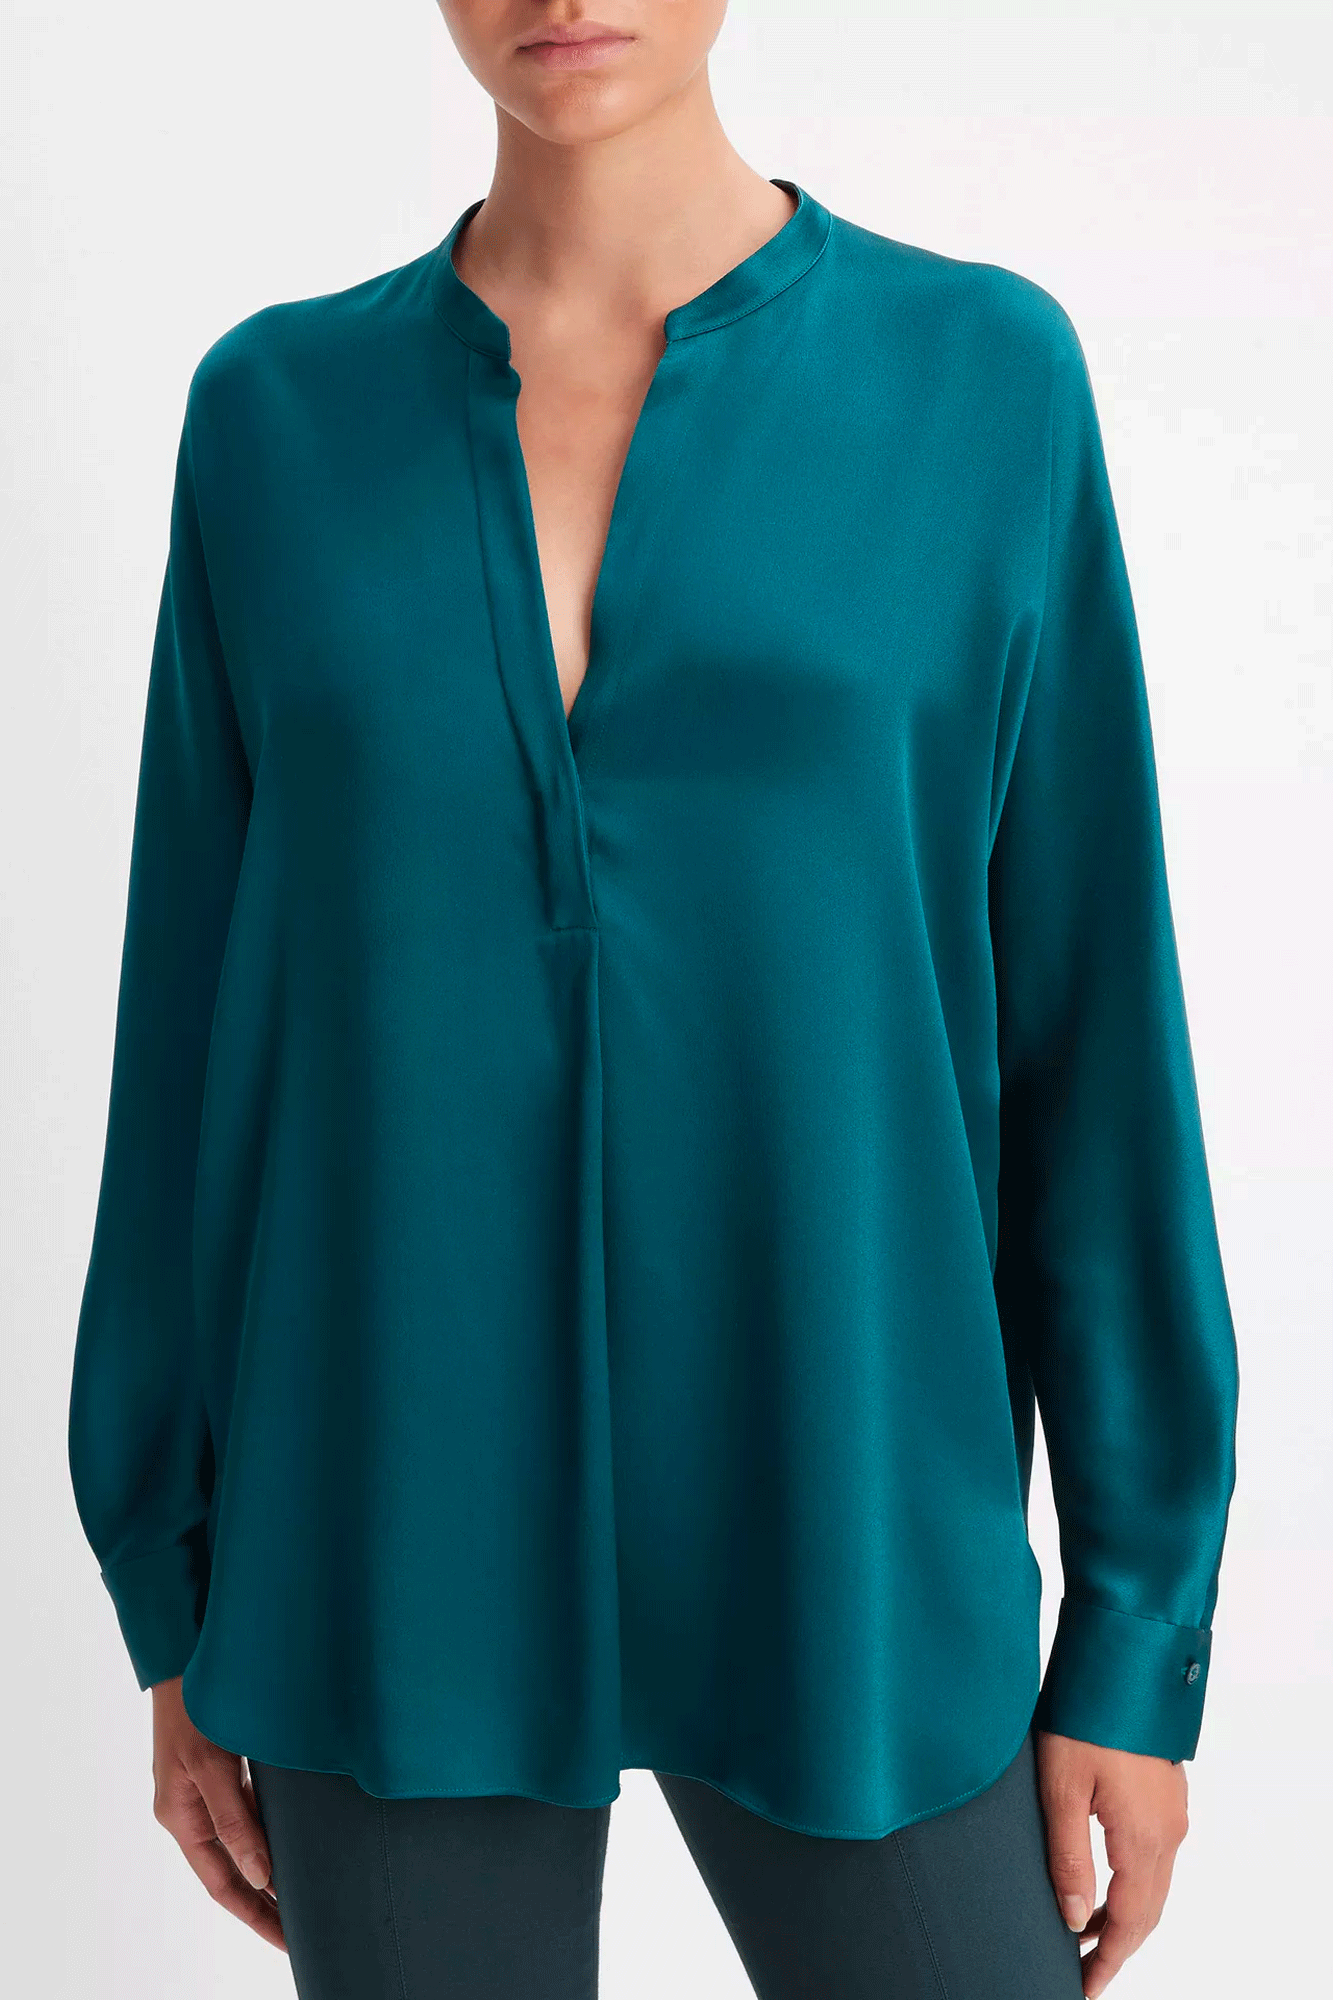 Experience classic femininity in this Band Collar Blouse from Vince. Crafted from smooth silk satin, it features a band collar, split neckline, and long sleeves, providing an effortlessly polished look for any occasion. Enjoy a timeless look with this elegant blouse.